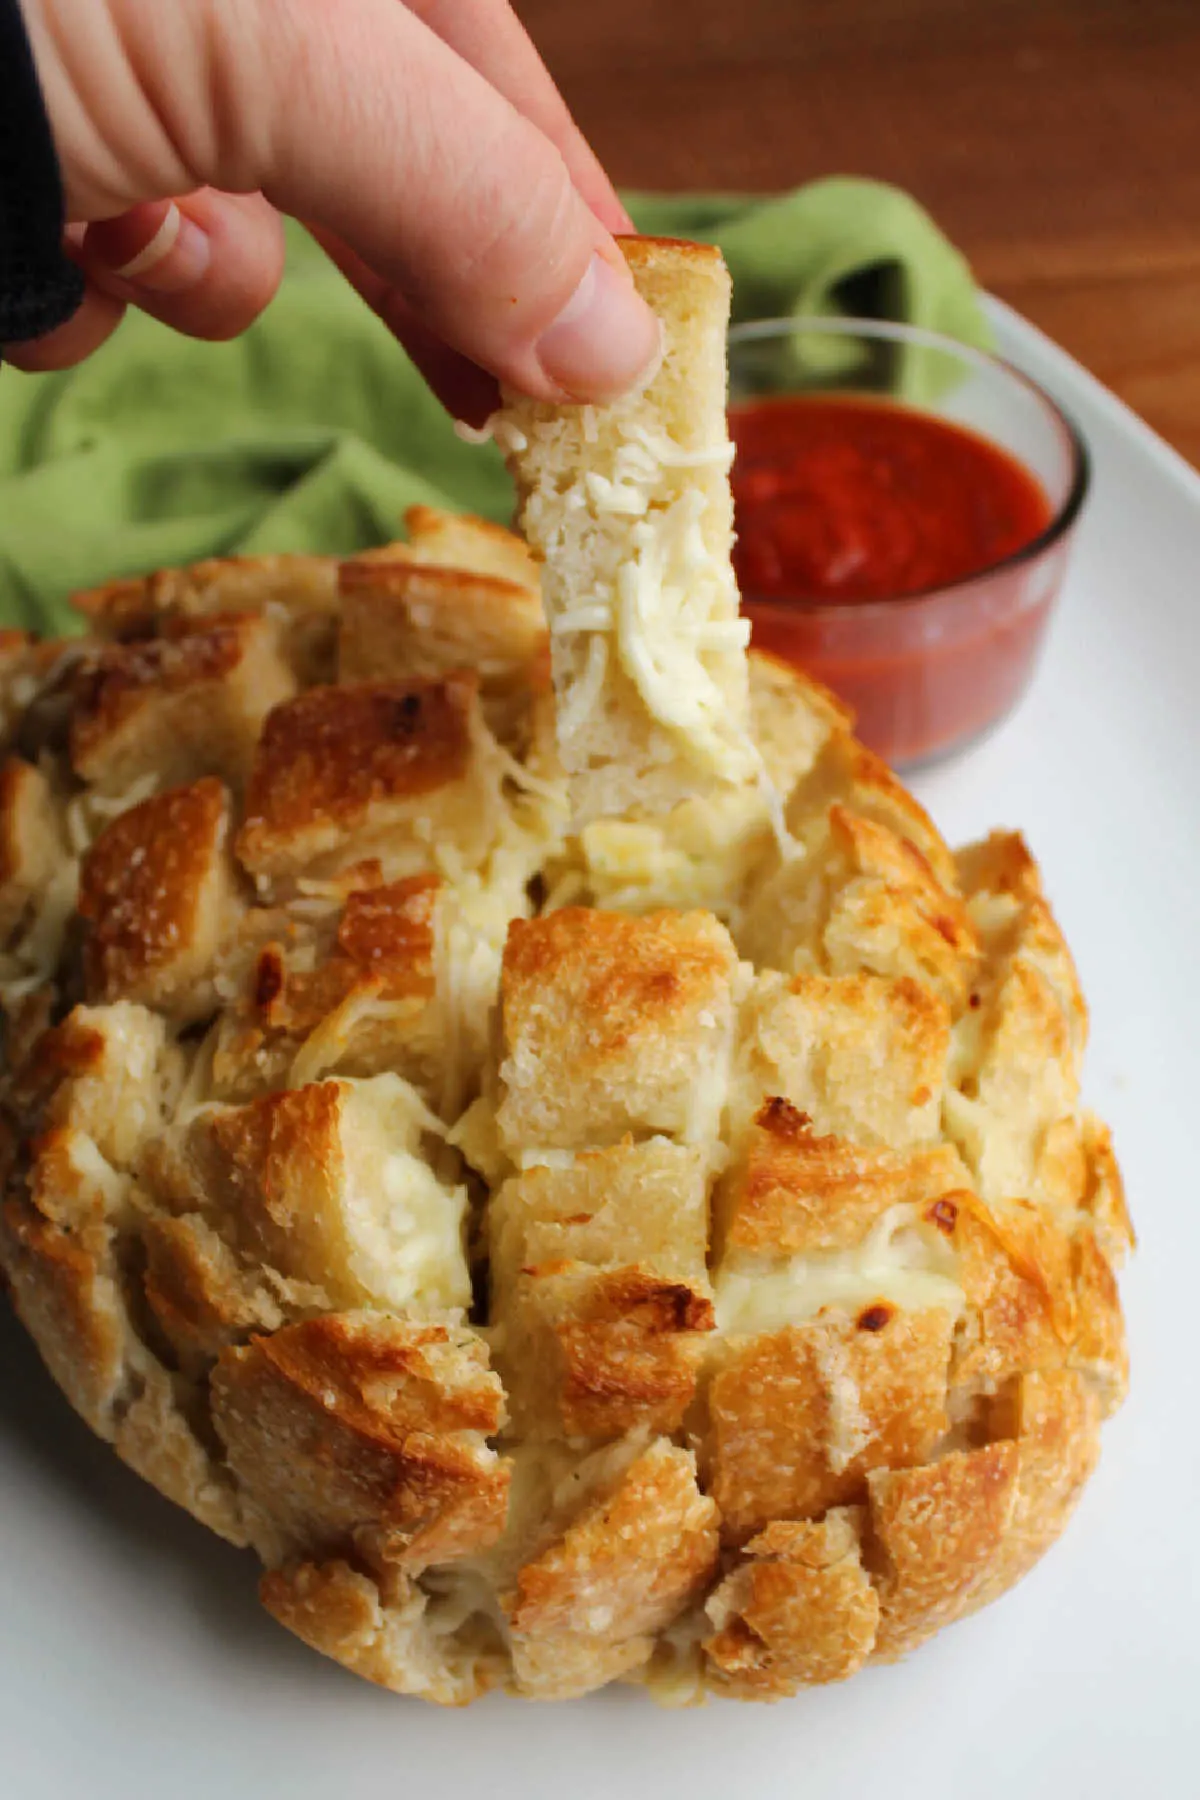 Pulling a piece of cheesy garlic bread out of a loaf of sourdough bread.